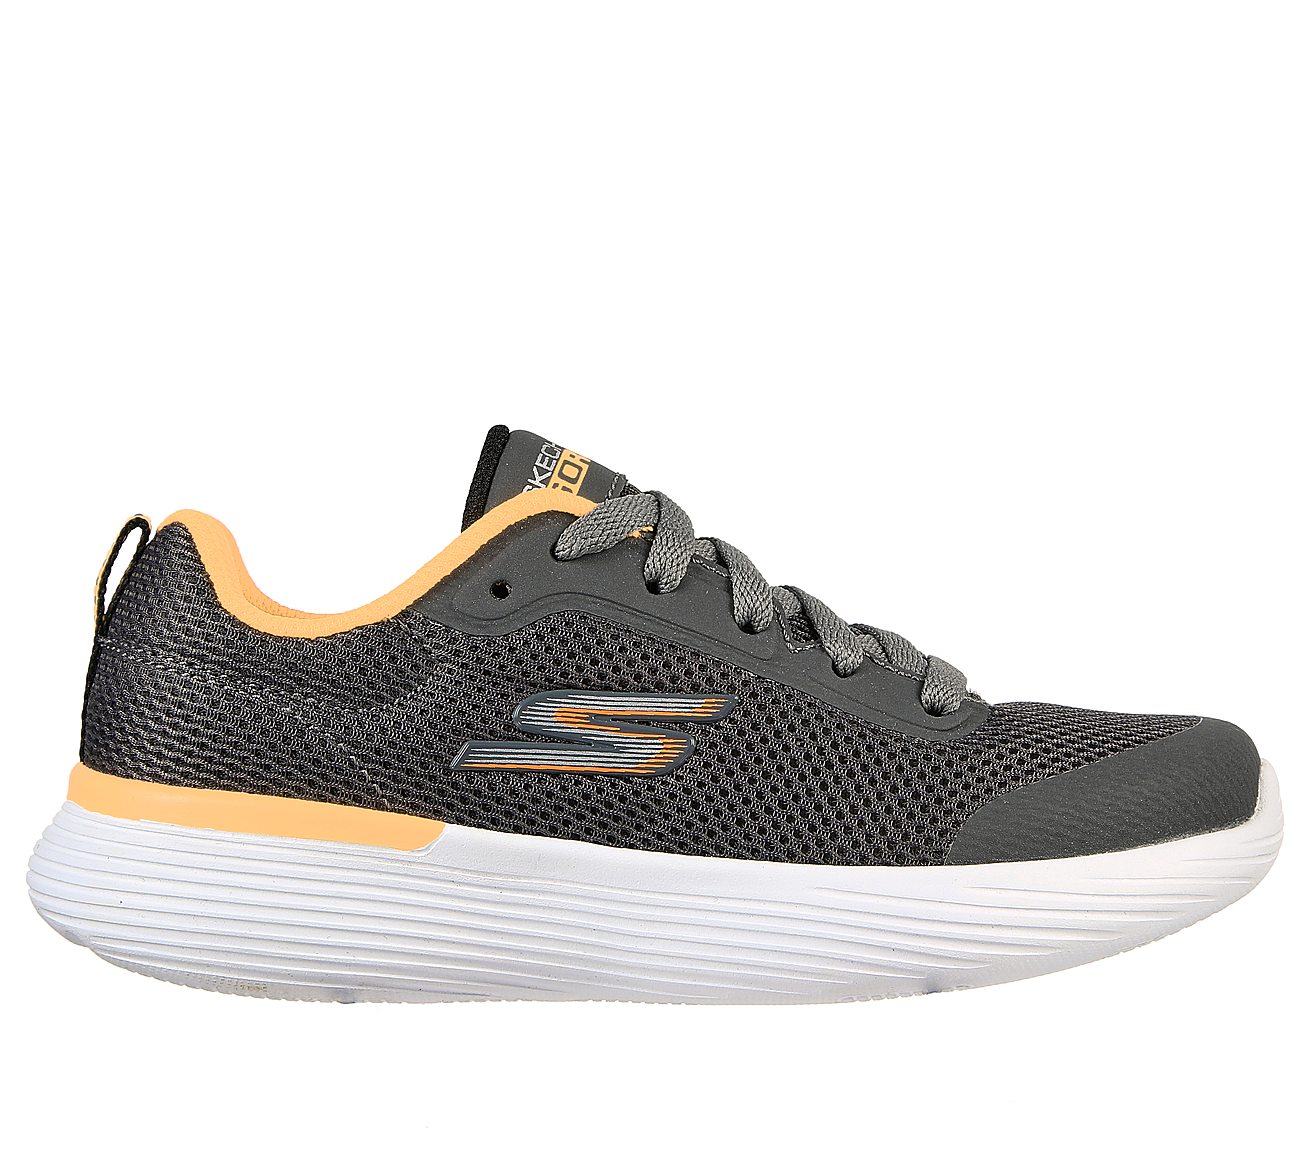 GO RUN 400 V2 - OMEGA,  Footwear Lateral View